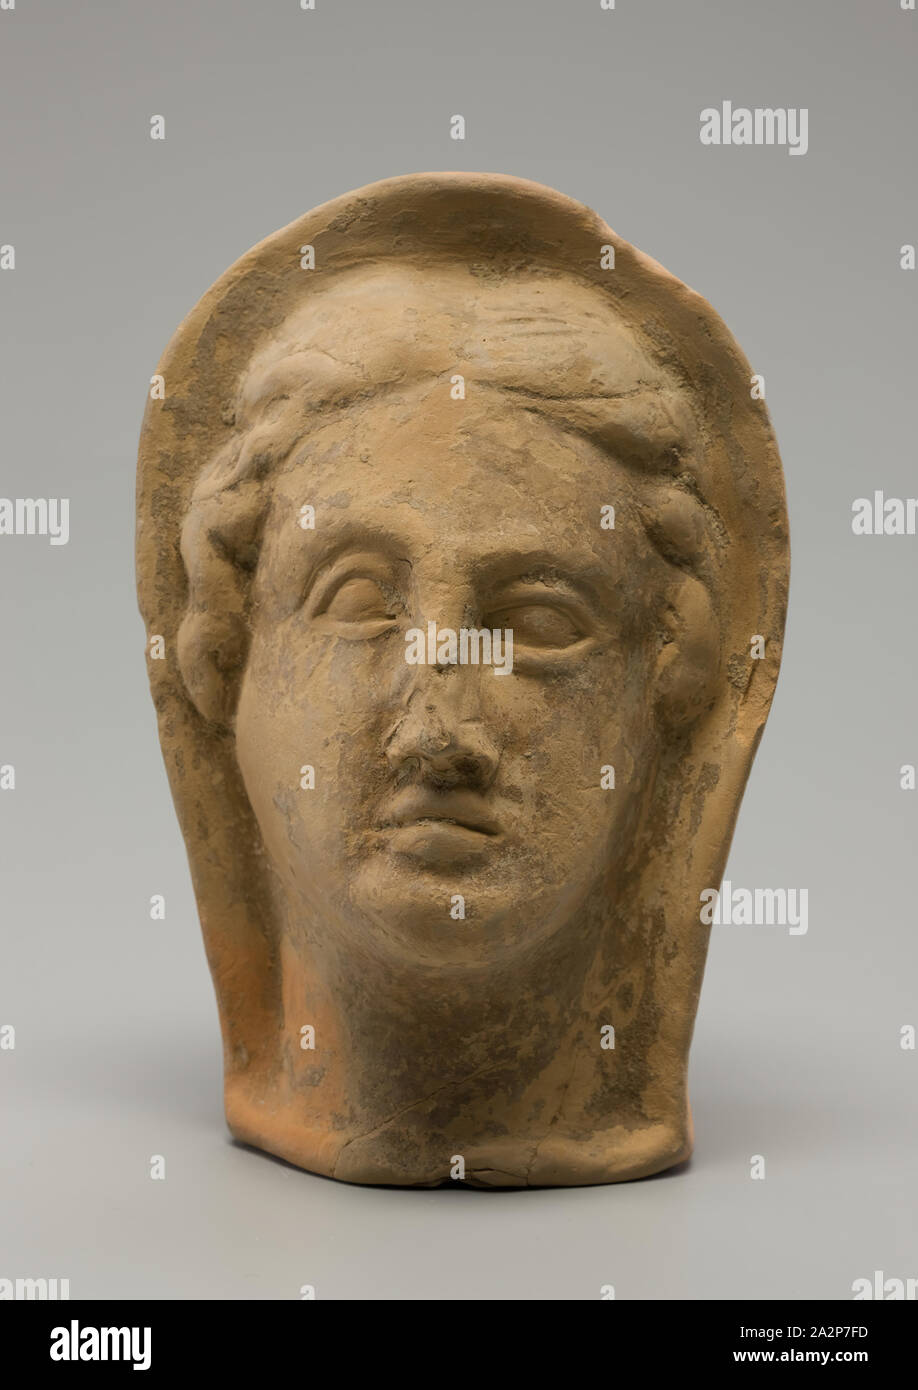 possibly Etruscan, possibly Italic, Head of a Woman, 3rd or early 2nd century BCE, Terracotta, Overall: 6 3/4 × 4 3/8 × 4 inches (17.1 × 11.1 × 10.2 cm Stock Photo